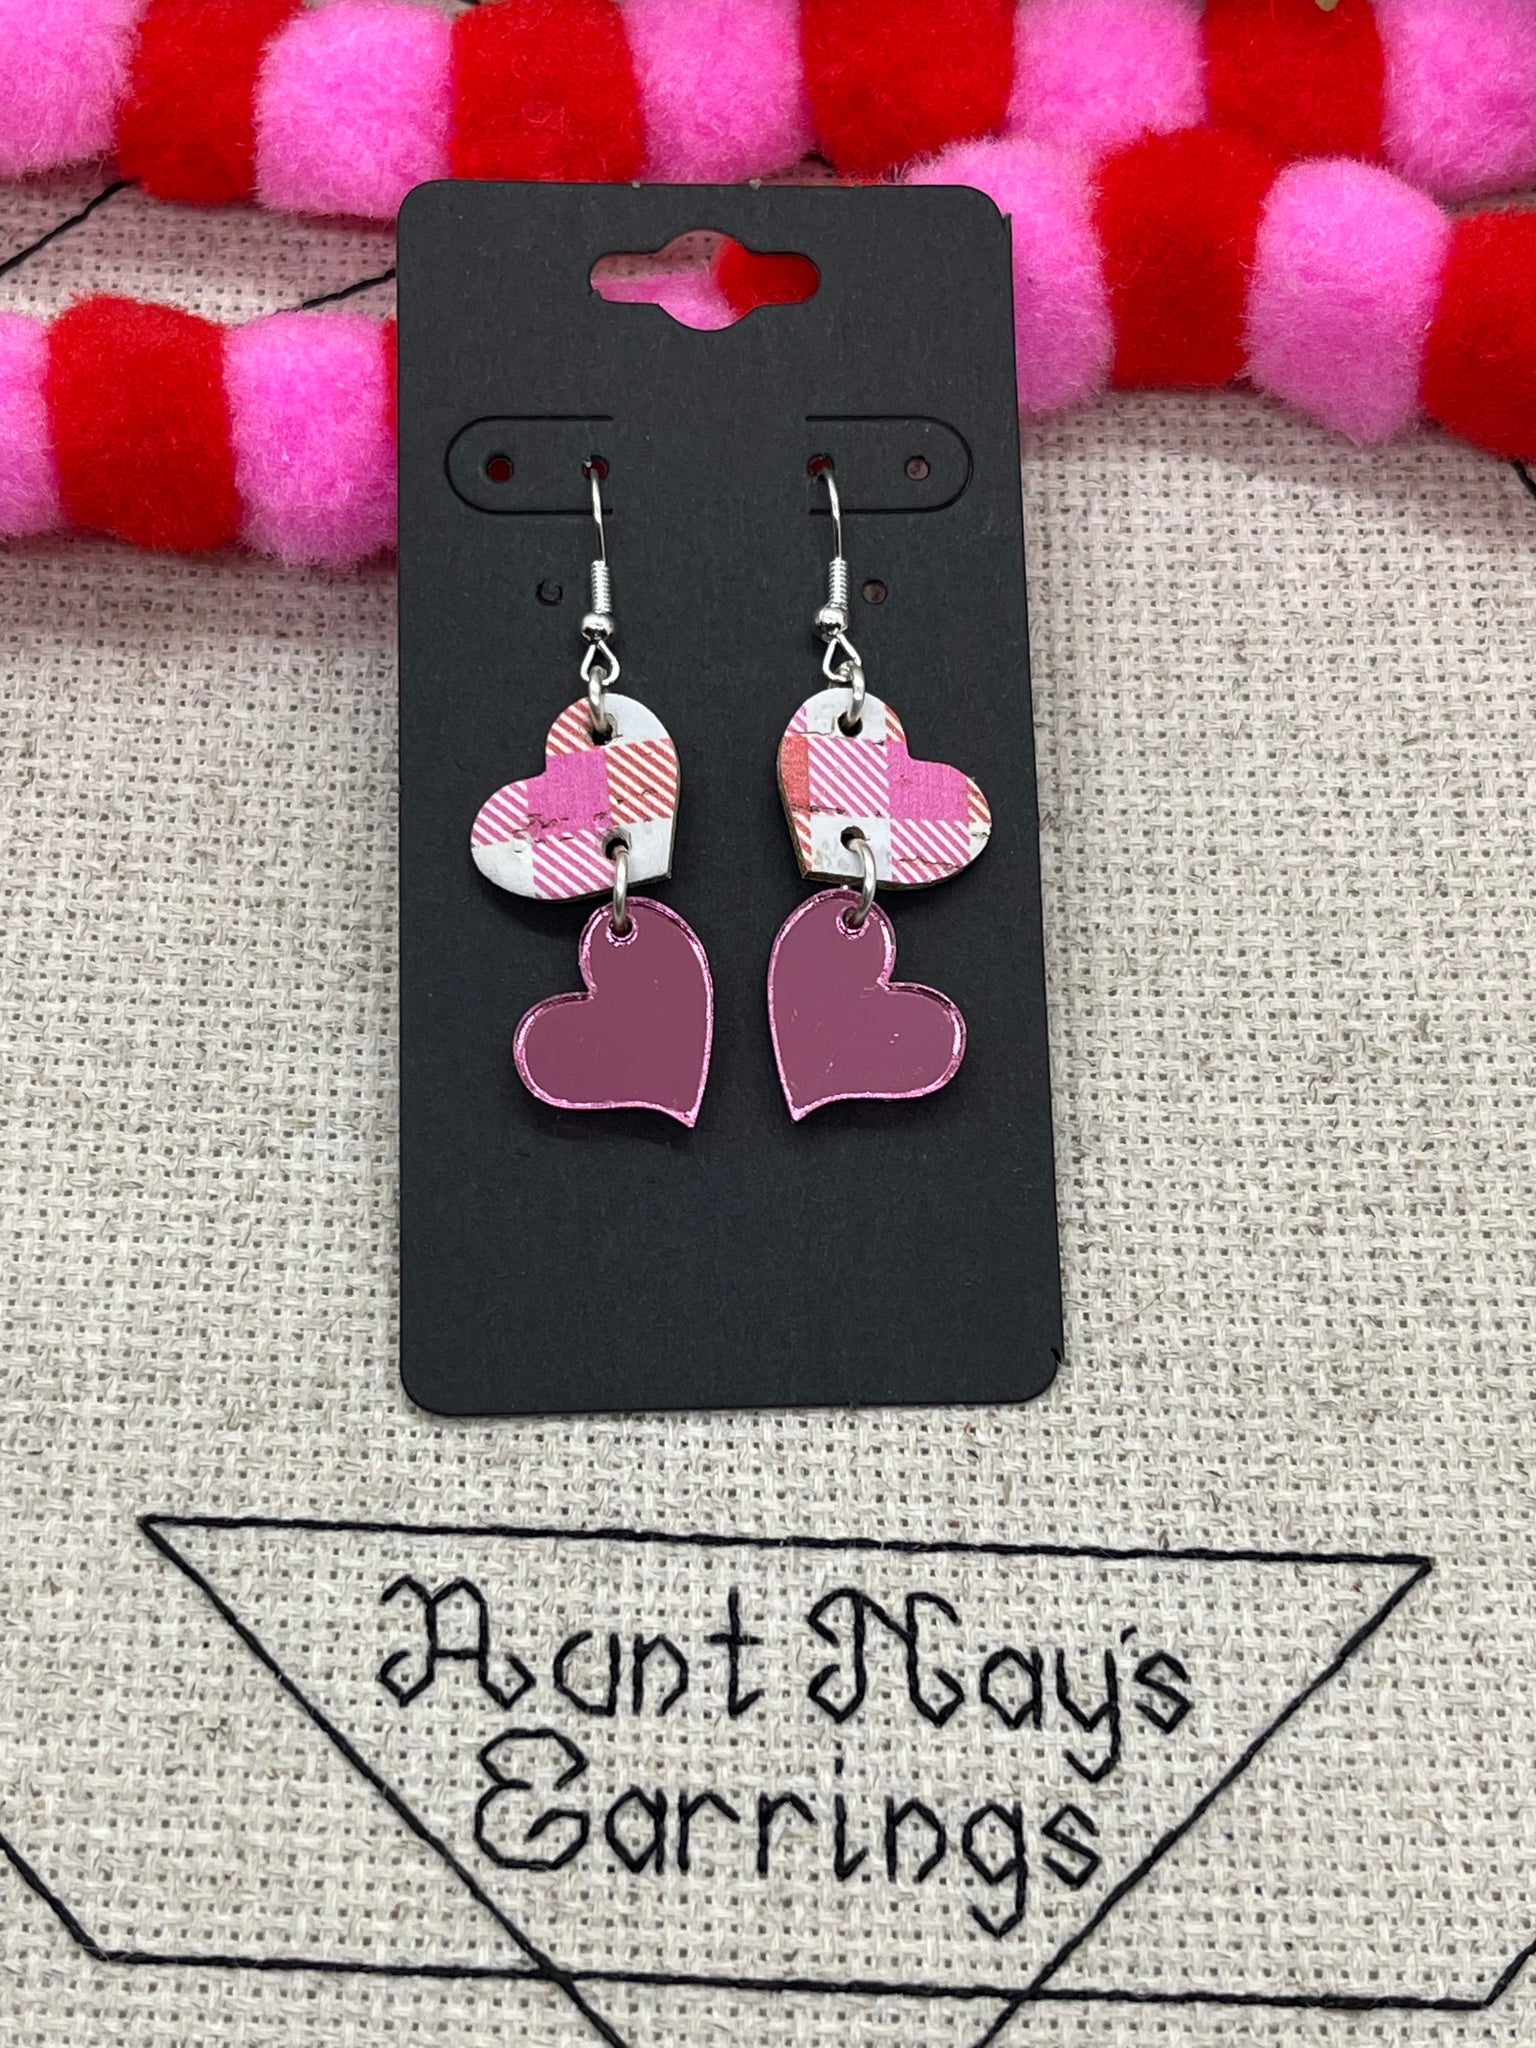 Double Heart Stacked Earrings in Pink Mirror and Red-Pink-White Plaid Cork